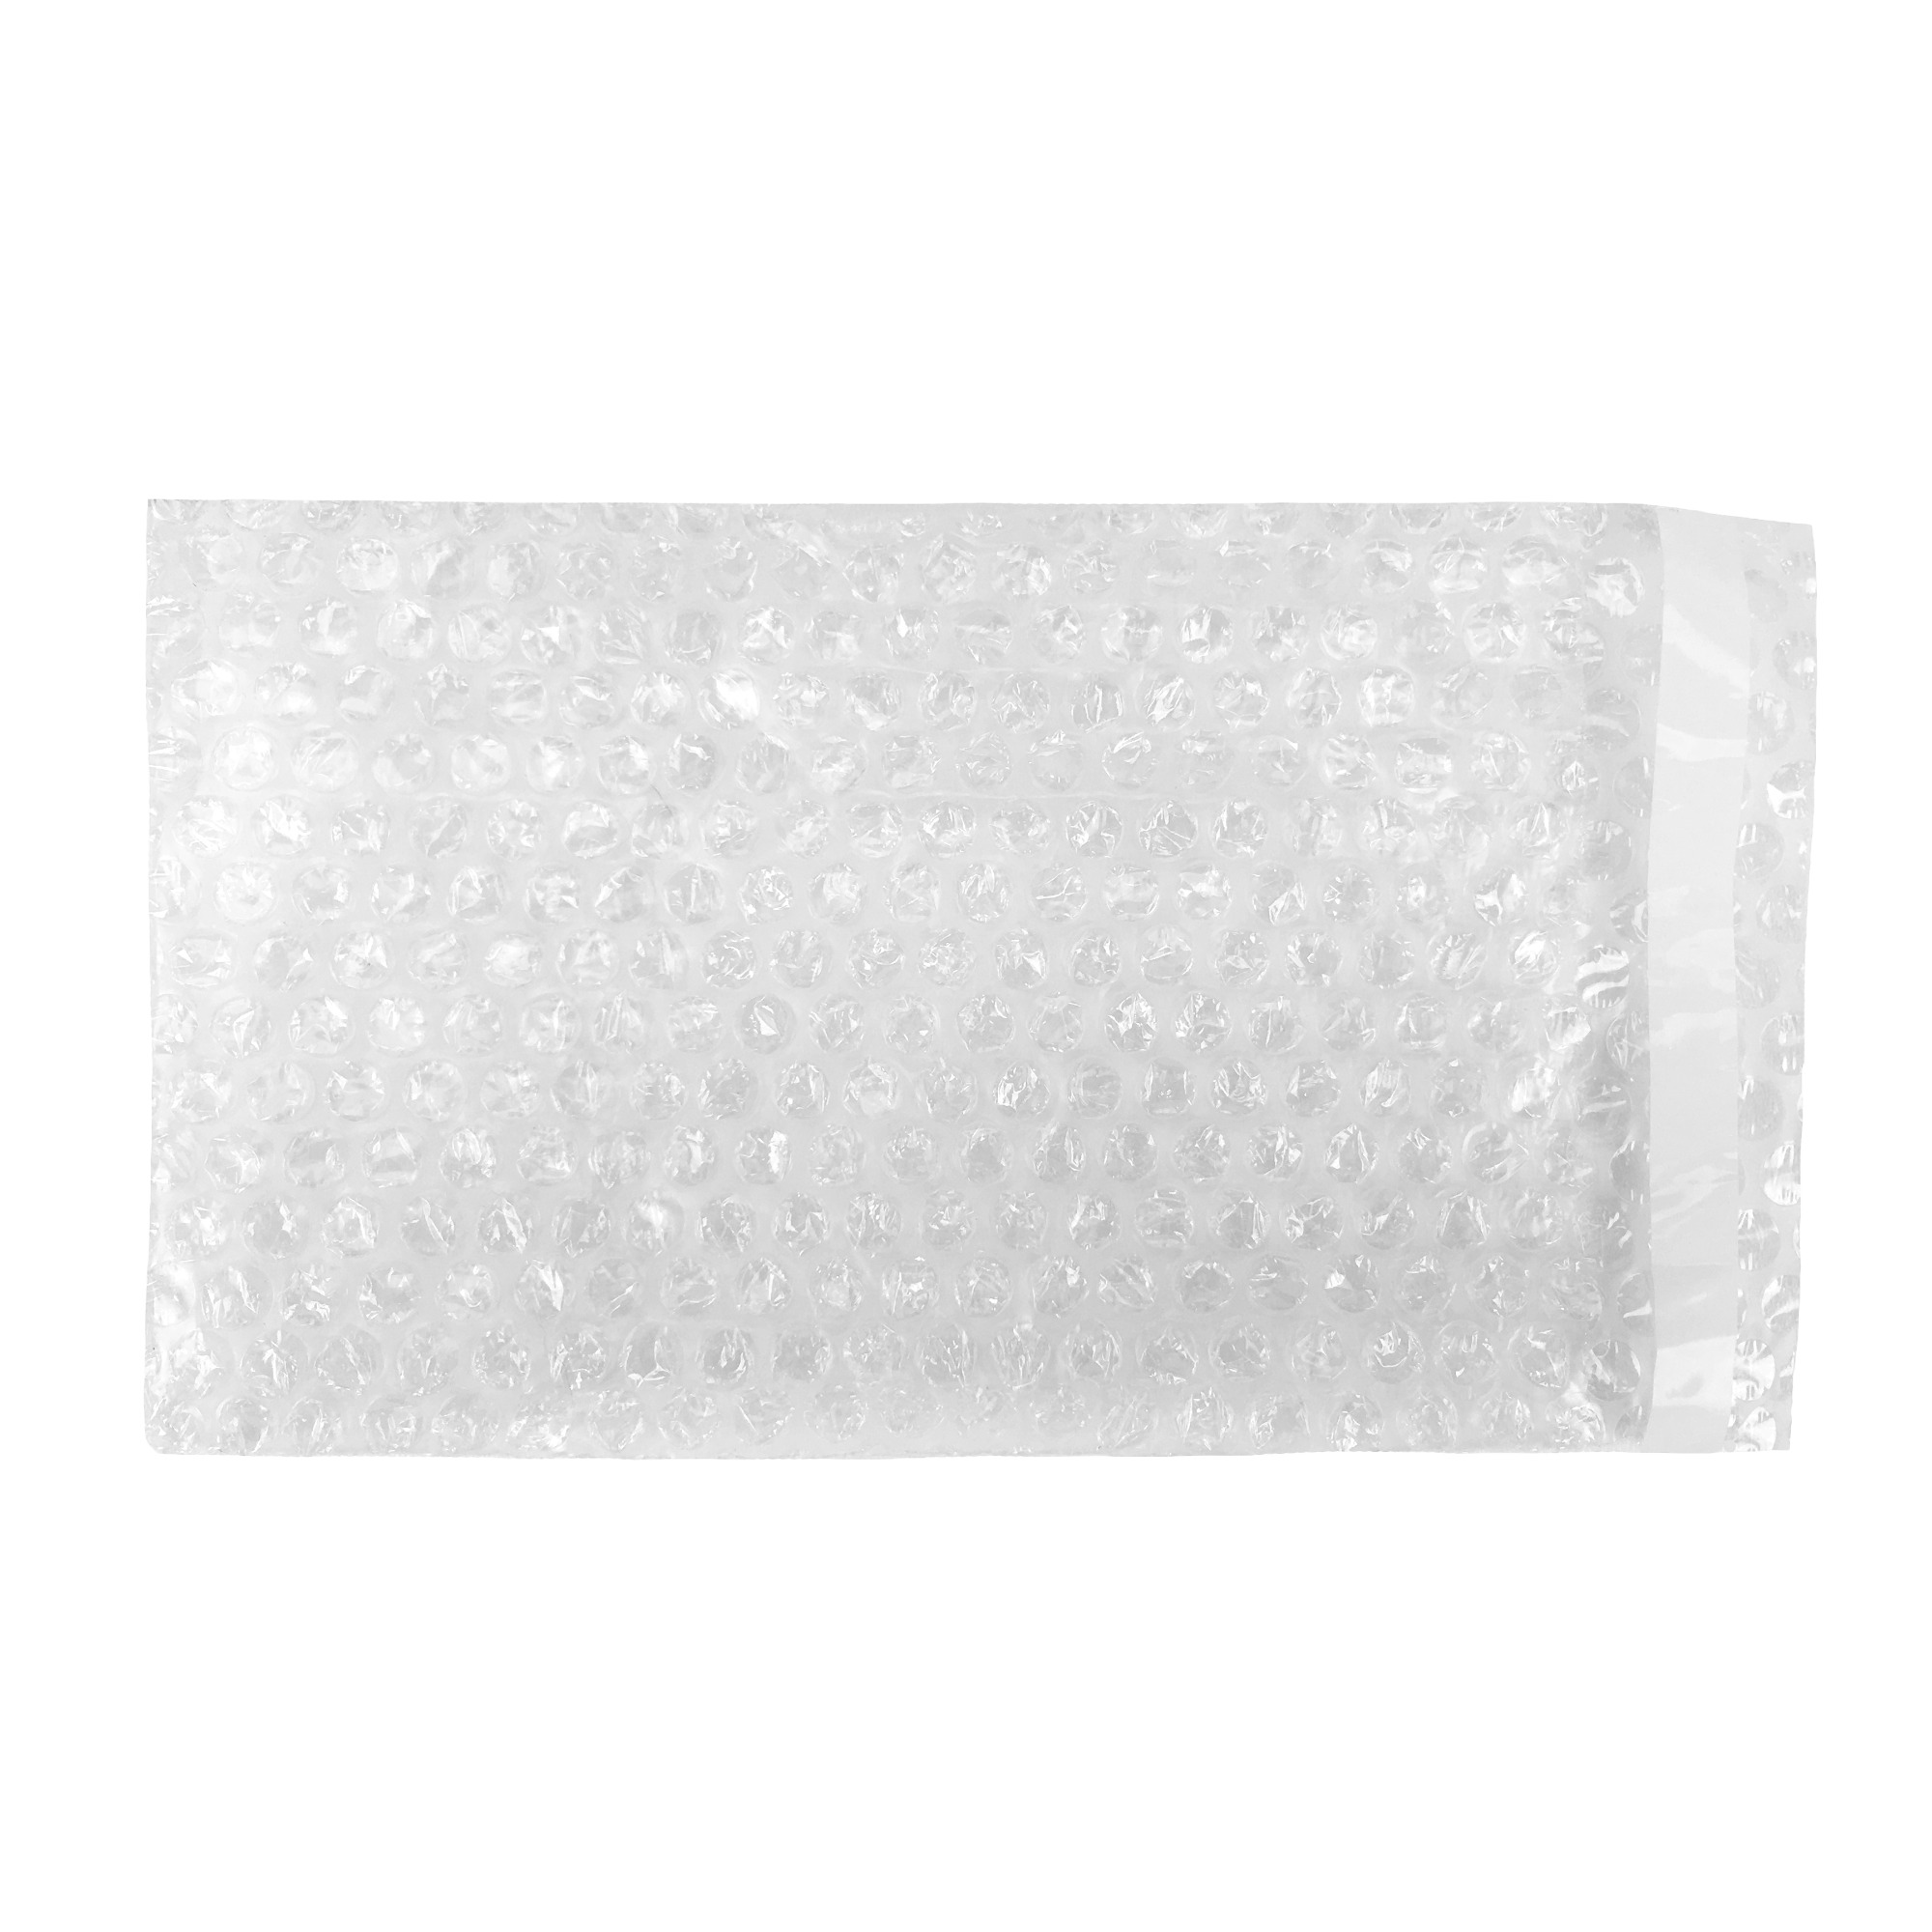 550 7x8.5 BUBBLE OUT POUCHES BAGS WRAP CUSHIONING SELF SEAL CLEAR 7/" x 8.5/"